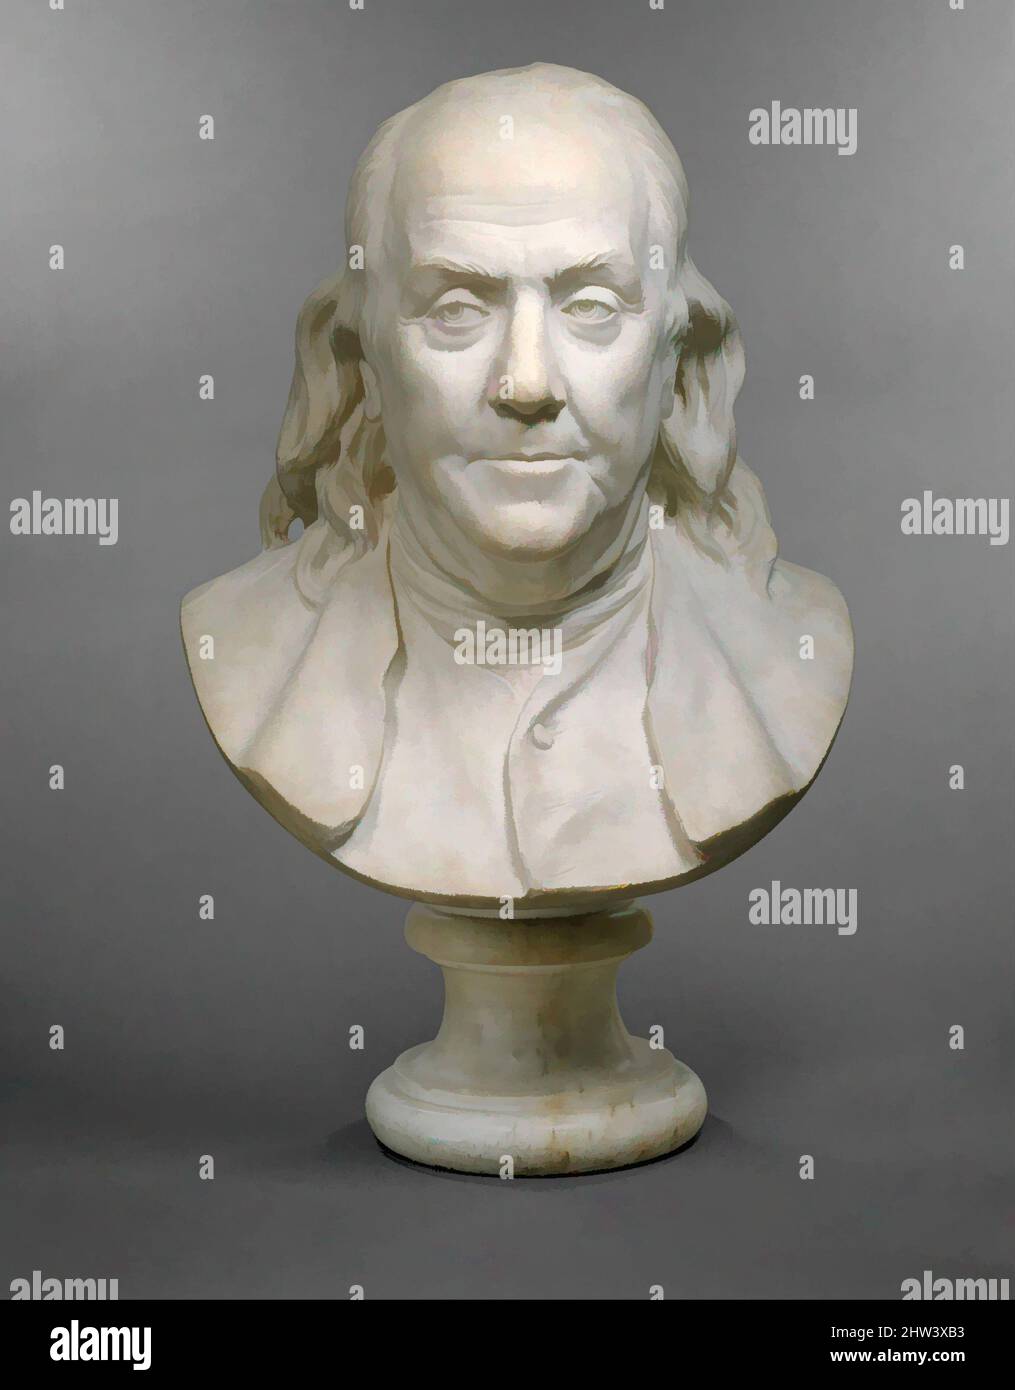 Art inspired by Benjamin Franklin (1706–1790), 1778, French, Marble, Overall (weight confirmed): 23 1/8 × 14 1/2 × 11 1/4 in., 87 lb. (58.7 × 36.8 × 28.6 cm, 39.5 kg), Sculpture, Jean Antoine Houdon (French, Versailles 1741–1828 Paris), Houdon's bust of Franklin was the first of his, Classic works modernized by Artotop with a splash of modernity. Shapes, color and value, eye-catching visual impact on art. Emotions through freedom of artworks in a contemporary way. A timeless message pursuing a wildly creative new direction. Artists turning to the digital medium and creating the Artotop NFT Stock Photo